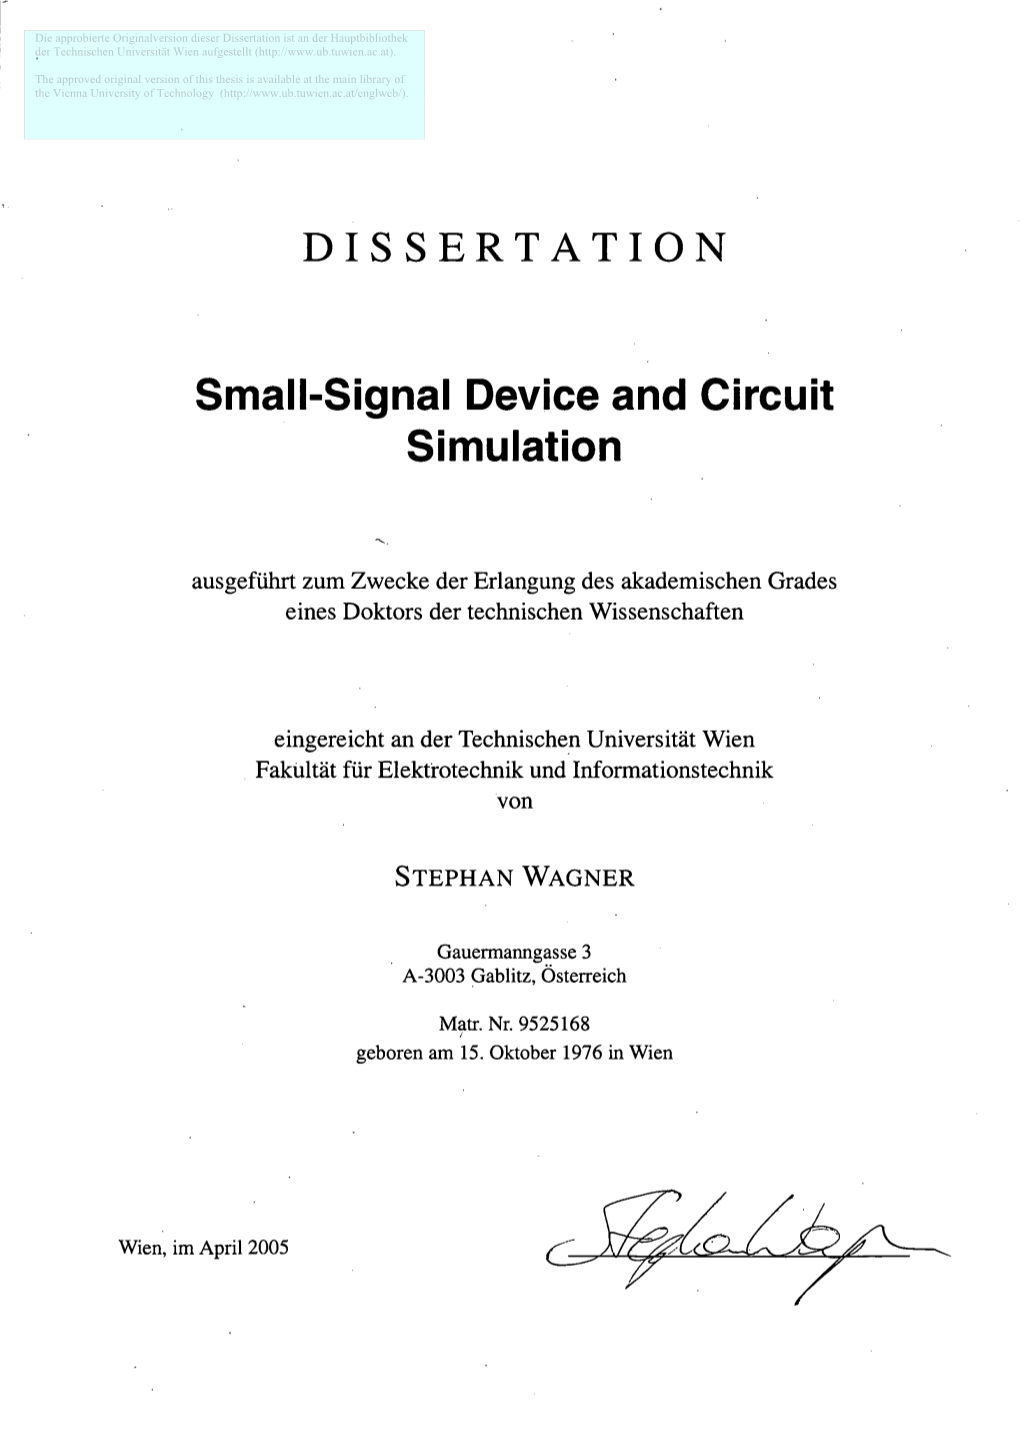 Small-Signal Device and Circuit Simulation